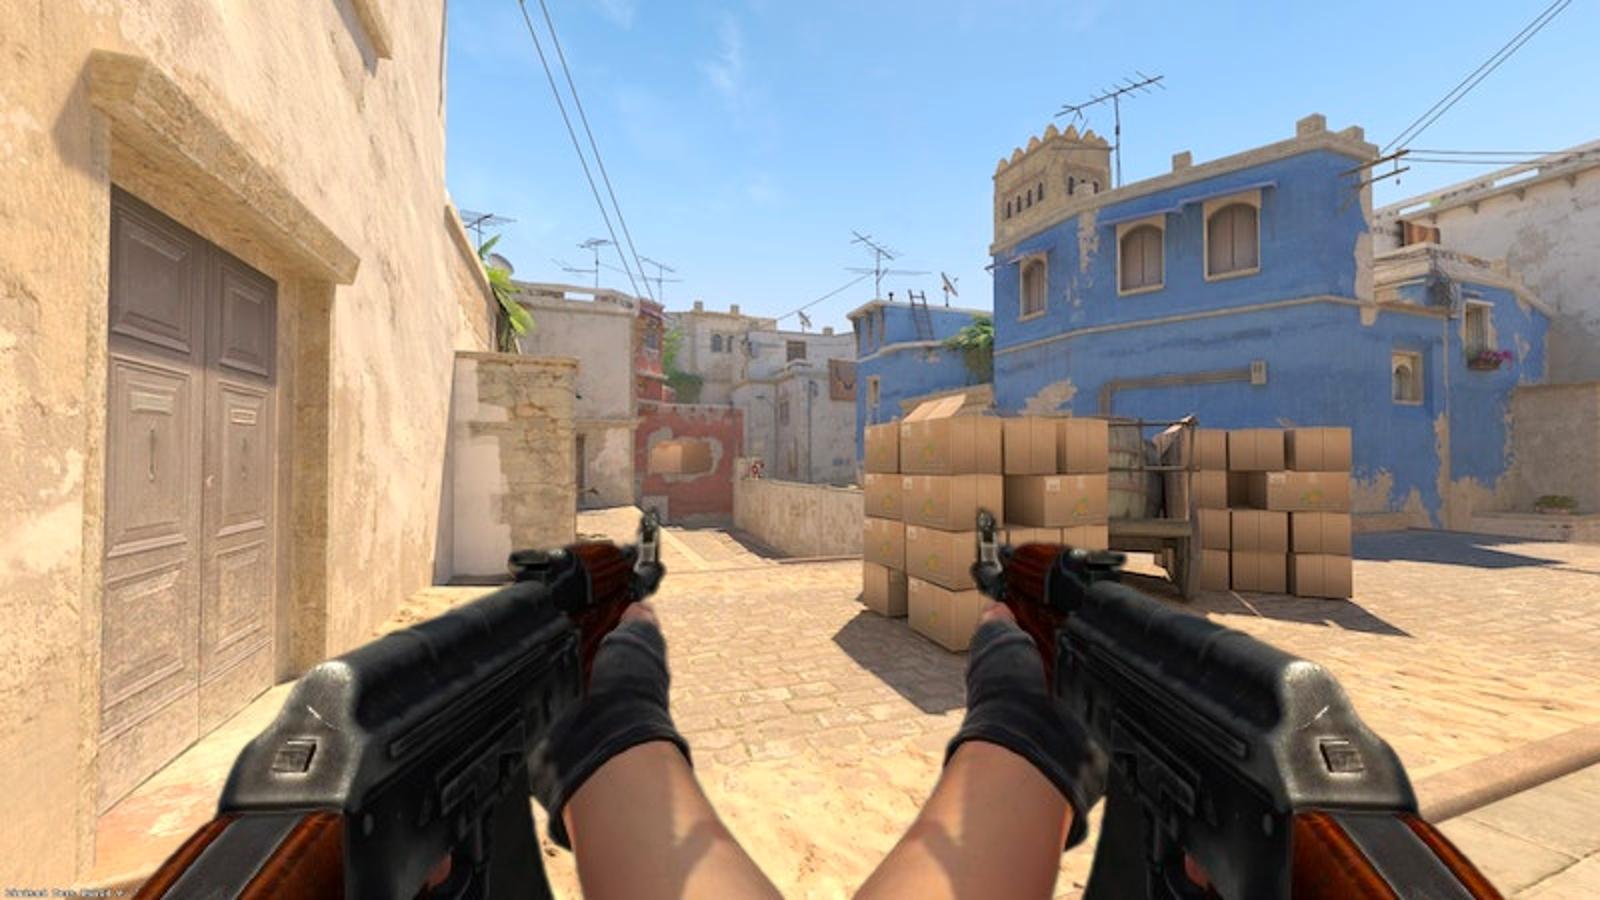 How to PLAY Counter-Strike 2!